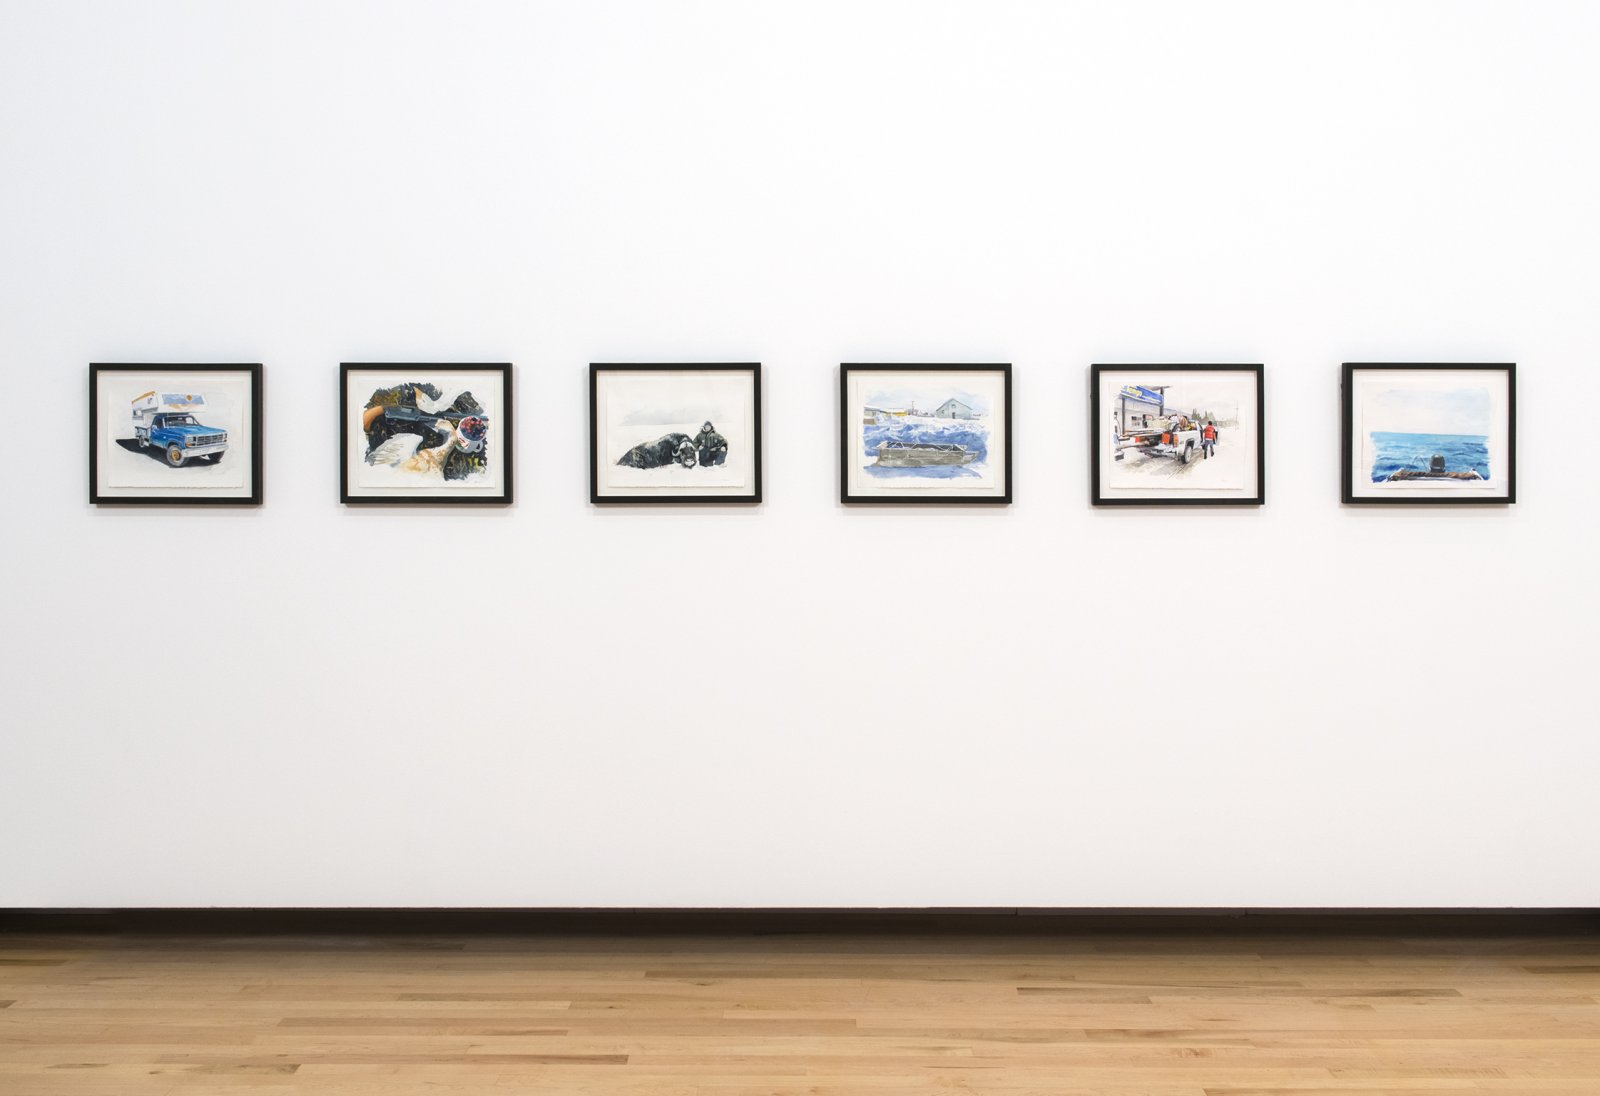 Kevin Schmidt, A Sign in the Northwest Passage (Watercolours), 2010, watercolour on paper, 15 x 19 in. (38 x 48 cm). Installation view, The Commons, Kamloops Art Gallery, Kamloops, Canada, 2015